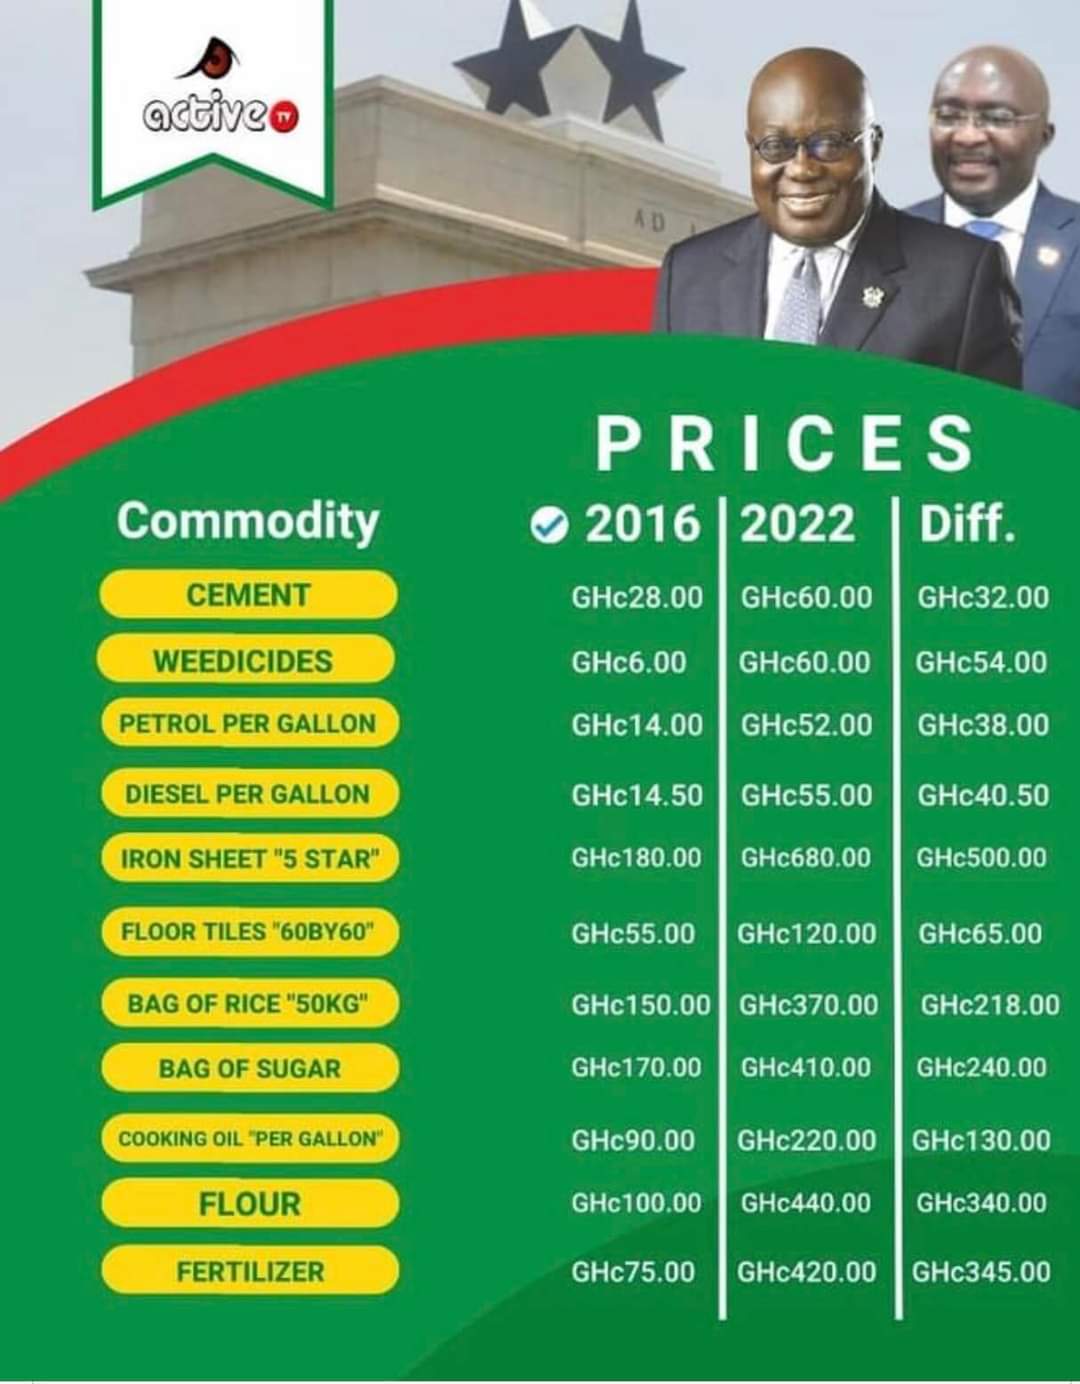 Cement Bag Increased By GHS 32.00, Petrol By GHS 38.00 Under Nana Addo,Fertilizer And Flour Price Will Shock You